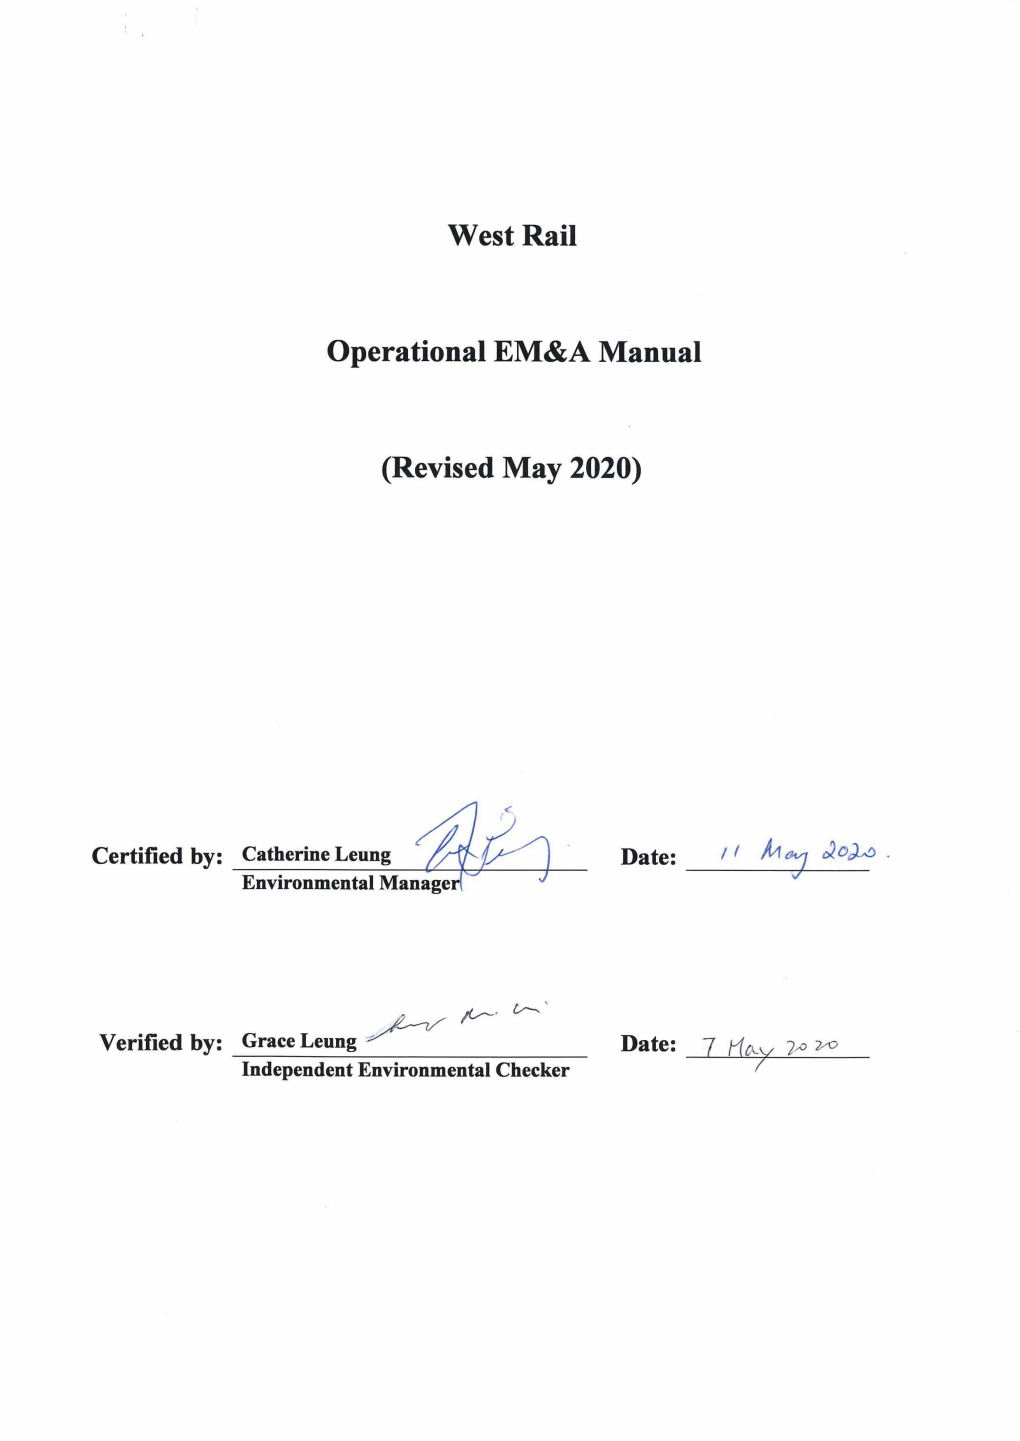 West Rail Operational EM&A Manual (Revised May 2020)